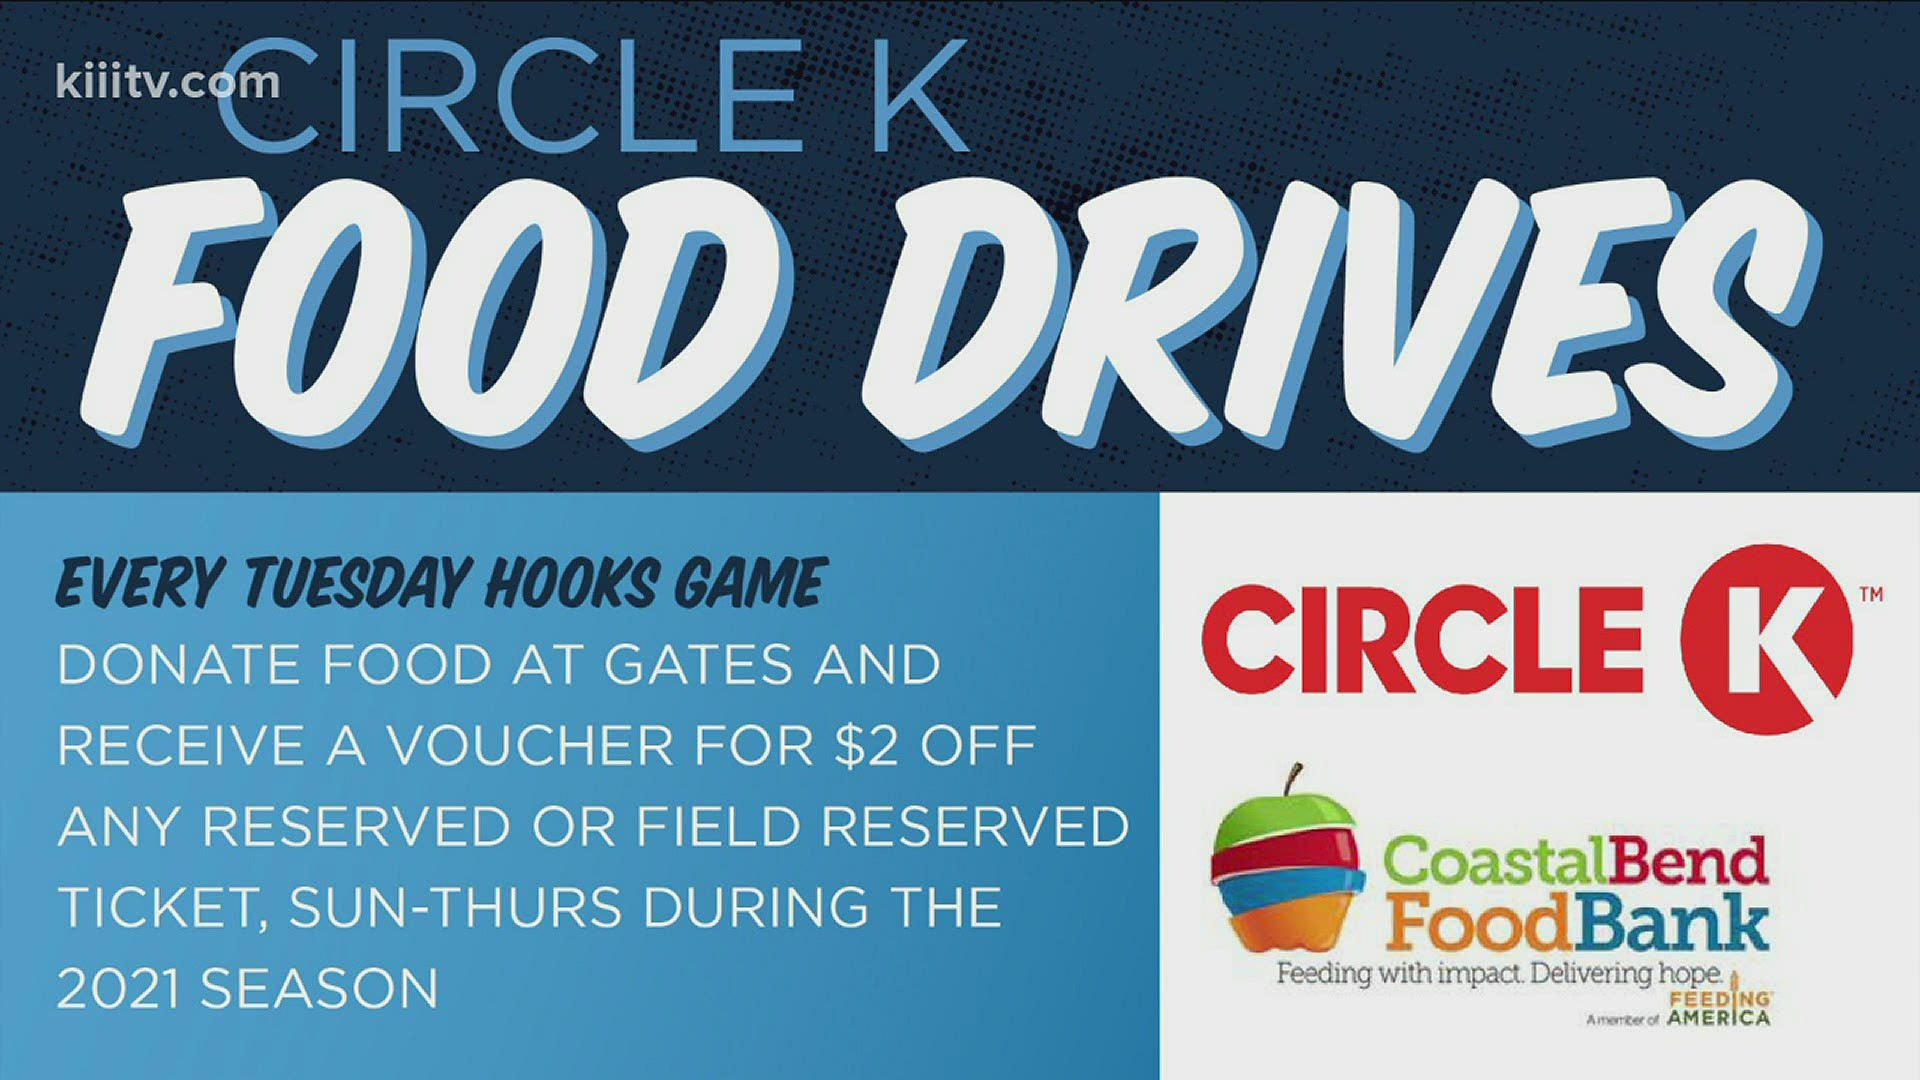 If you donate, you'll get a $2 voucher off any reserved or field reserved ticket.